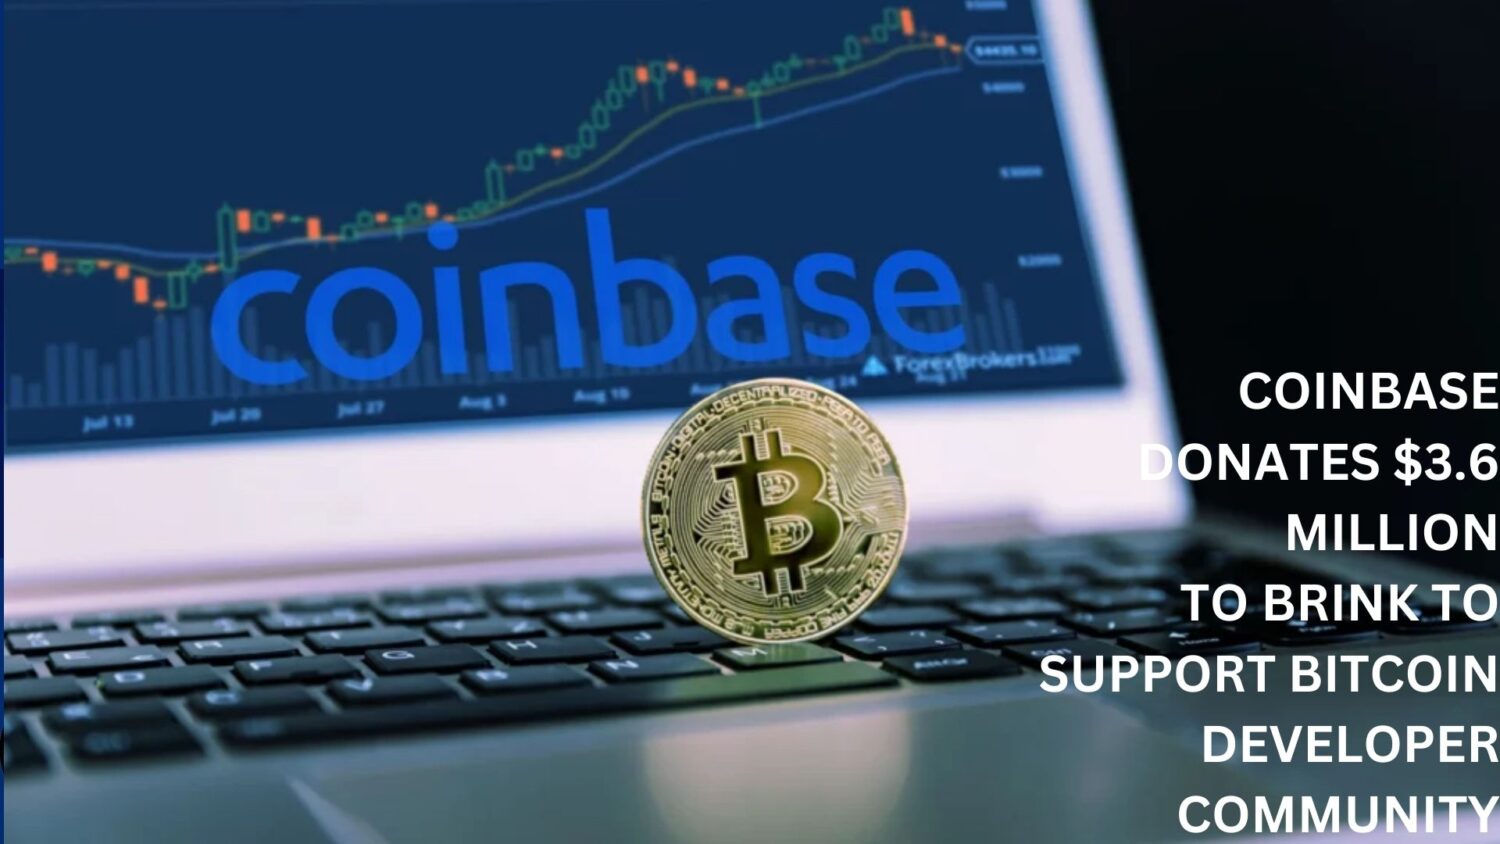 Coinbase Donates $3.6 Million To Brink To Support Bitcoin Developer Community